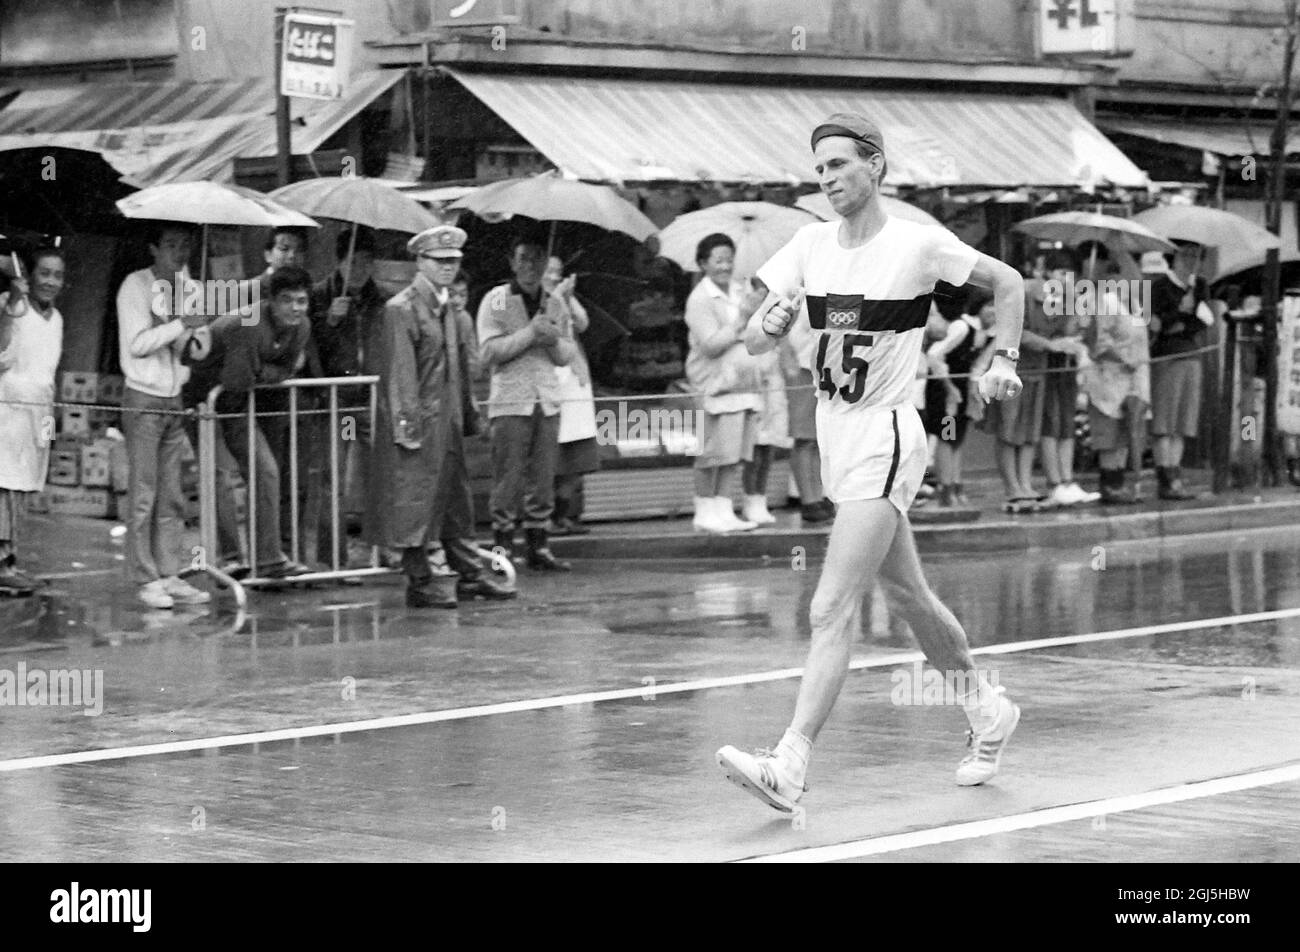 OLYMPICS, OLYMPIC SPORT GAMES - THE XVIII 18TH OLYMPIAD IN TOKYO, JAPAN - WALKING OLYMPICS 50KM SAKOWSKI DURING WALK HE FINISHED 8TH  ;  20 OCTOBER 1964 Stock Photo